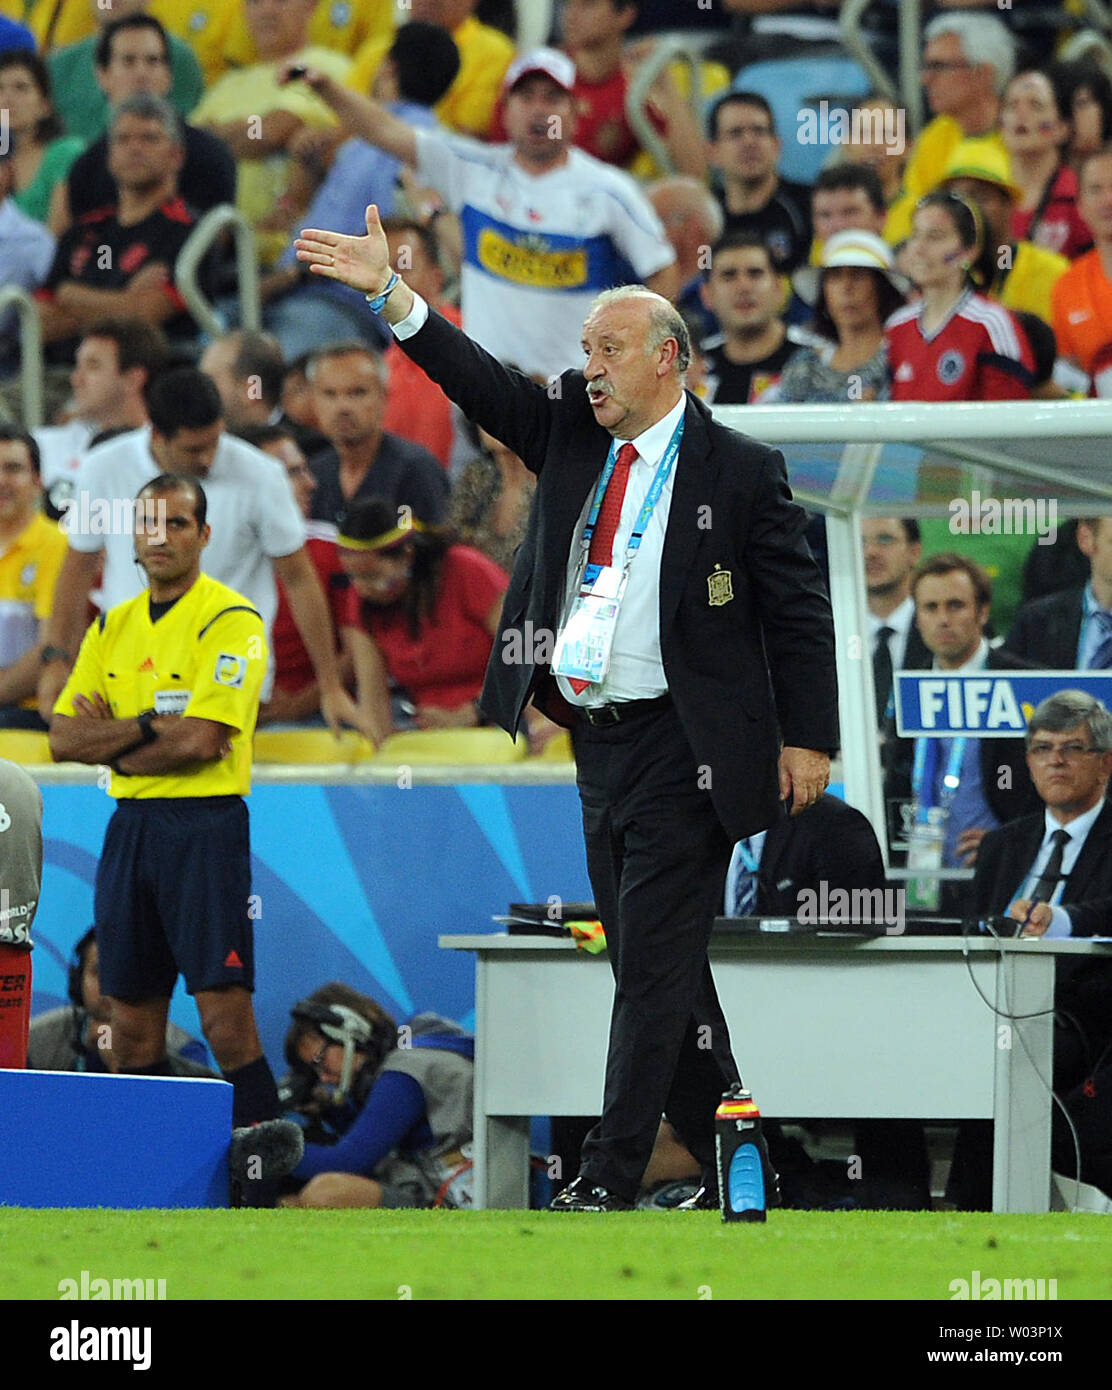 Spain manager Vicente Del Bosque gestures from the touchline during the 2014 FIFA World Cup Group B match at the Estadio do Maracana in Rio de Janeiro, Brazil on June 18, 2014. UPI/Chris Brunskill Stock Photo